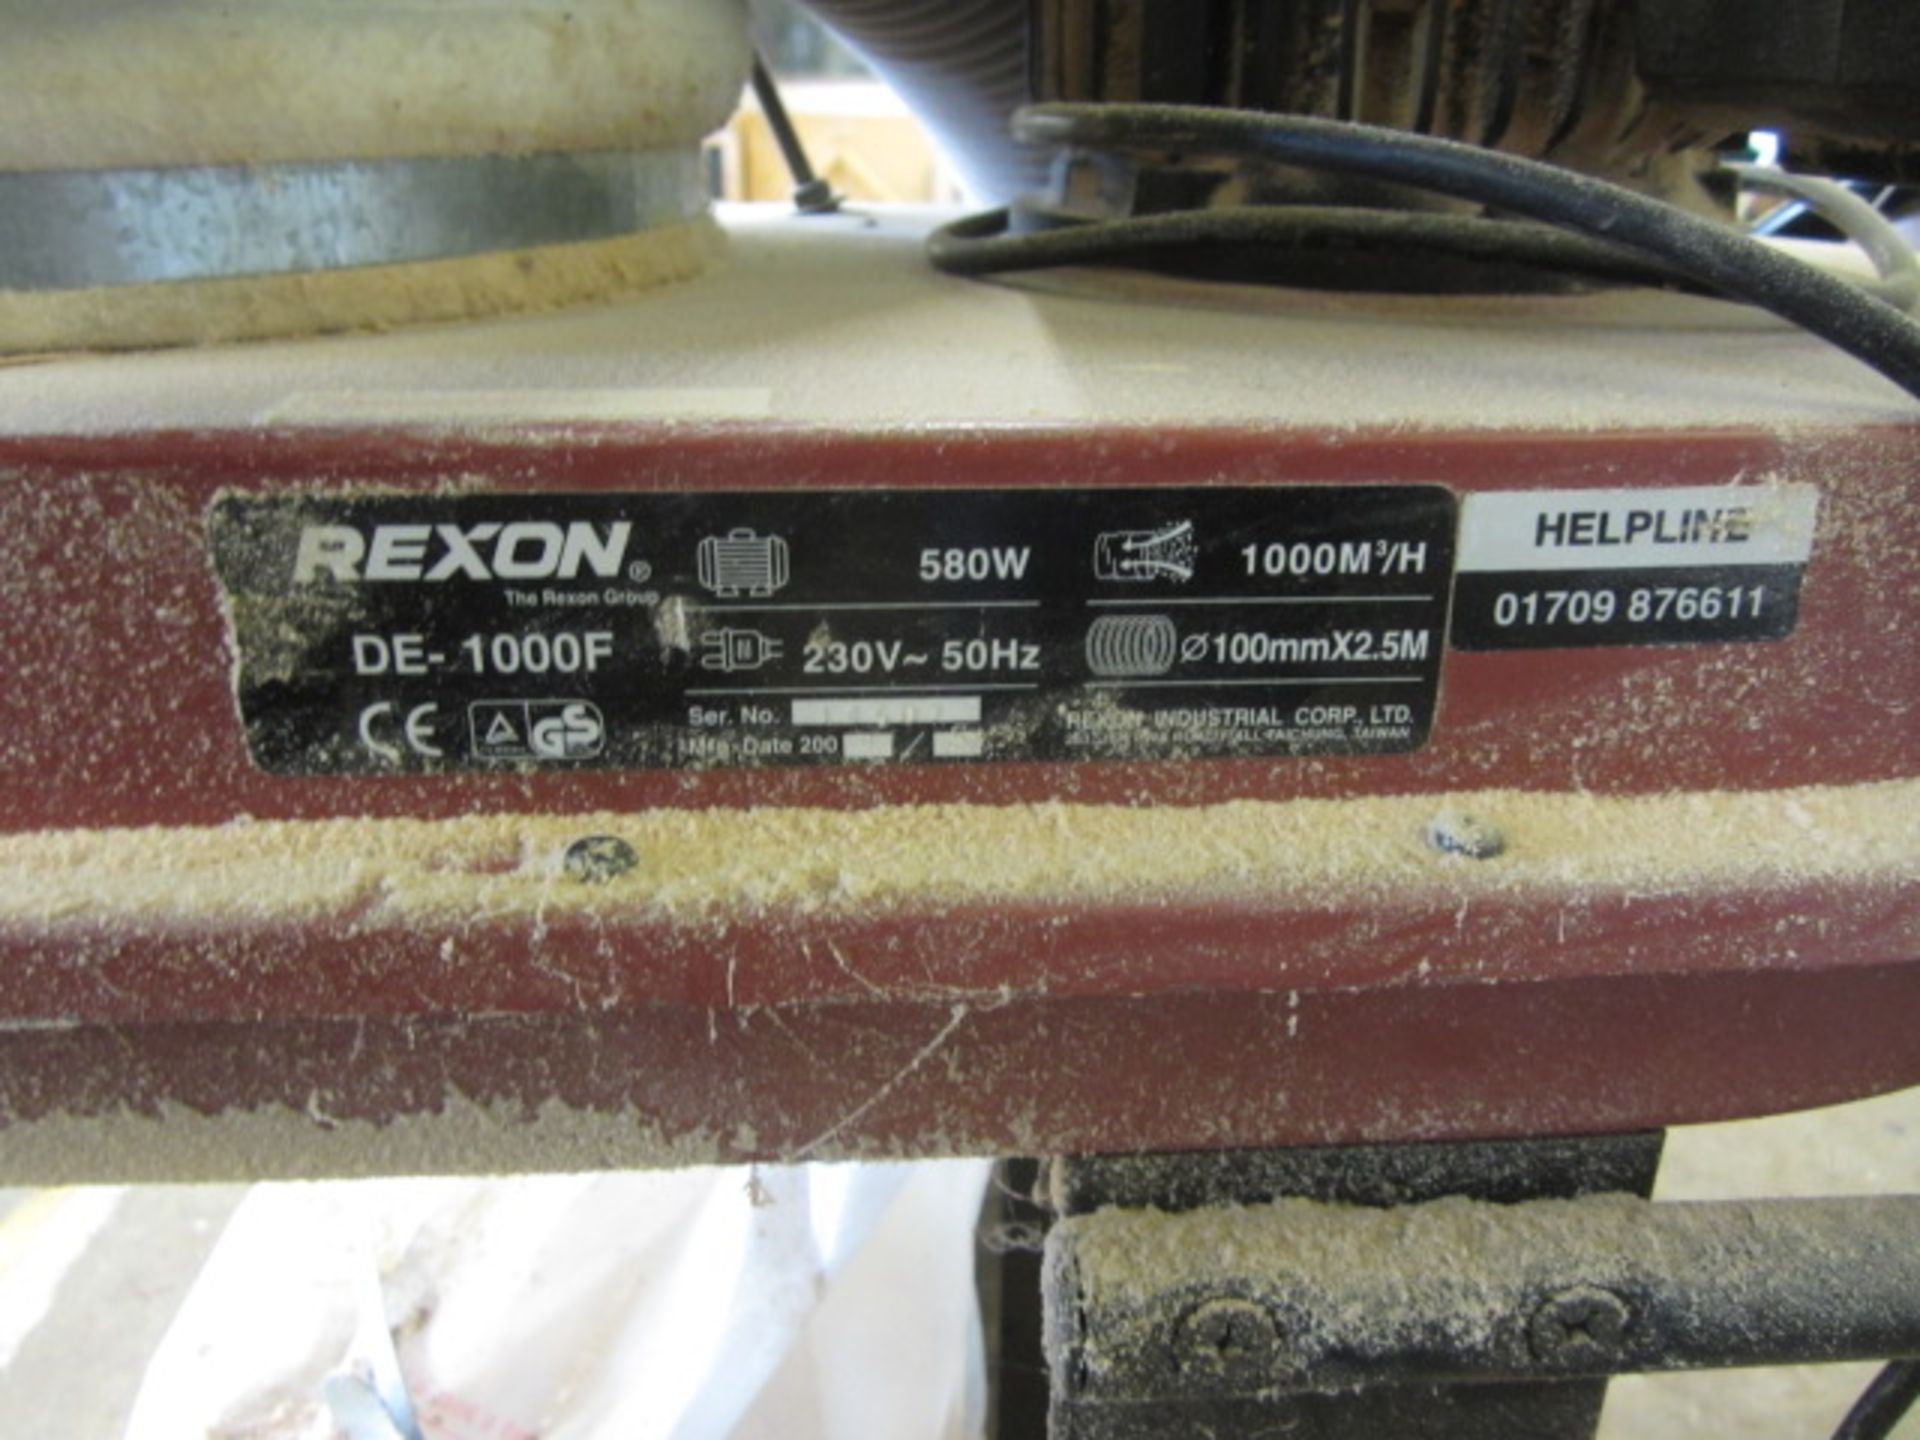 Rexon mobile single bag dust extractor, model DE-1000F, serial number 14607 - Image 4 of 4